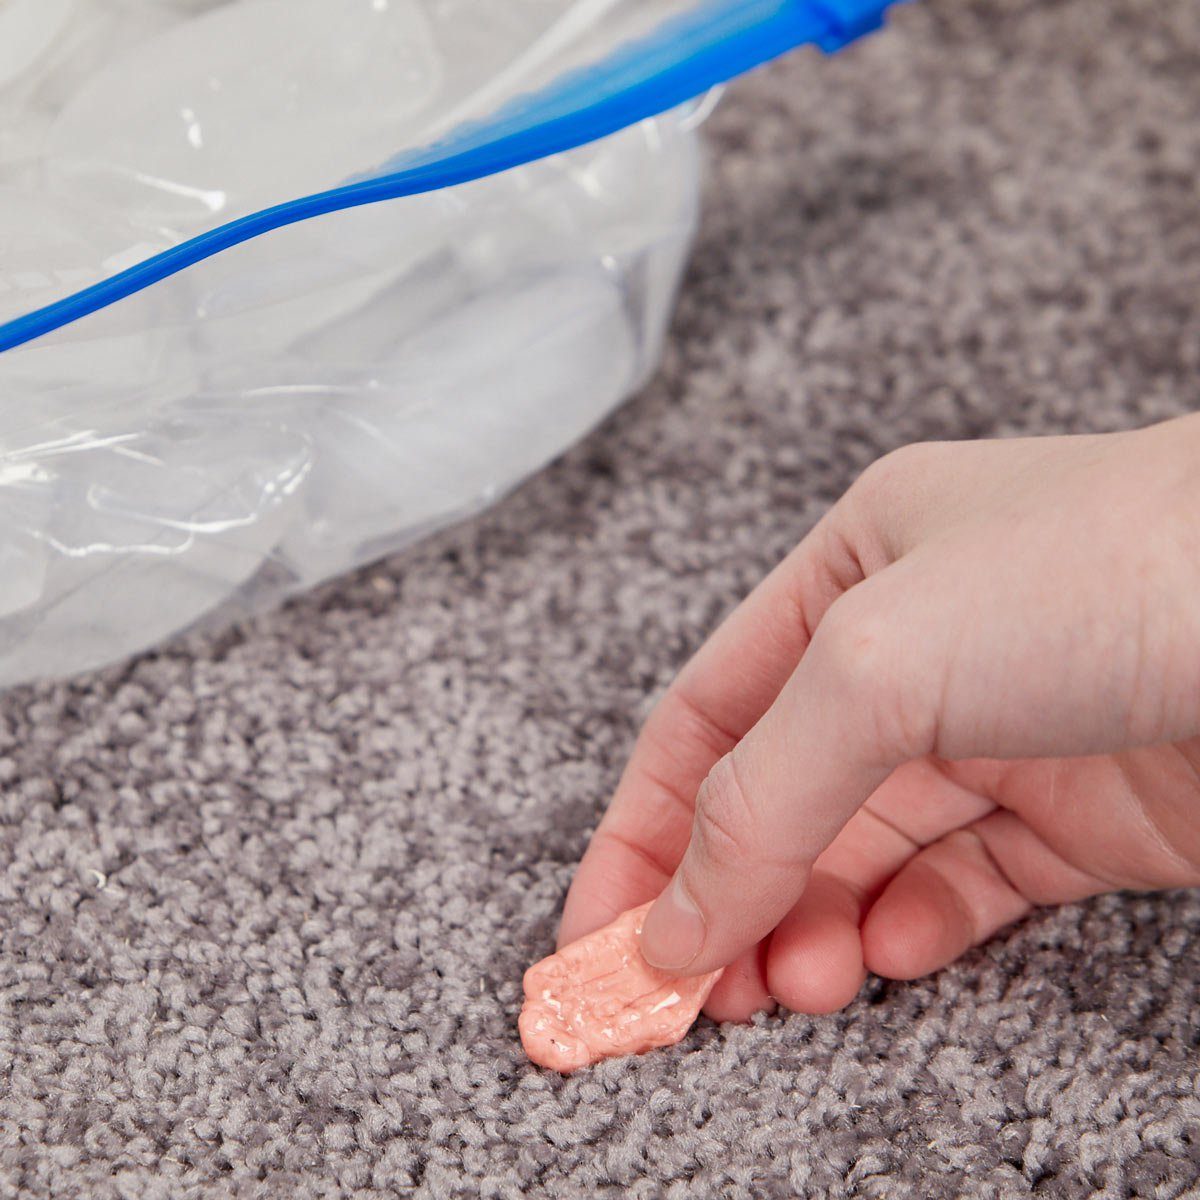 Spring cleaning tips - ice remove gum stuck in carpet